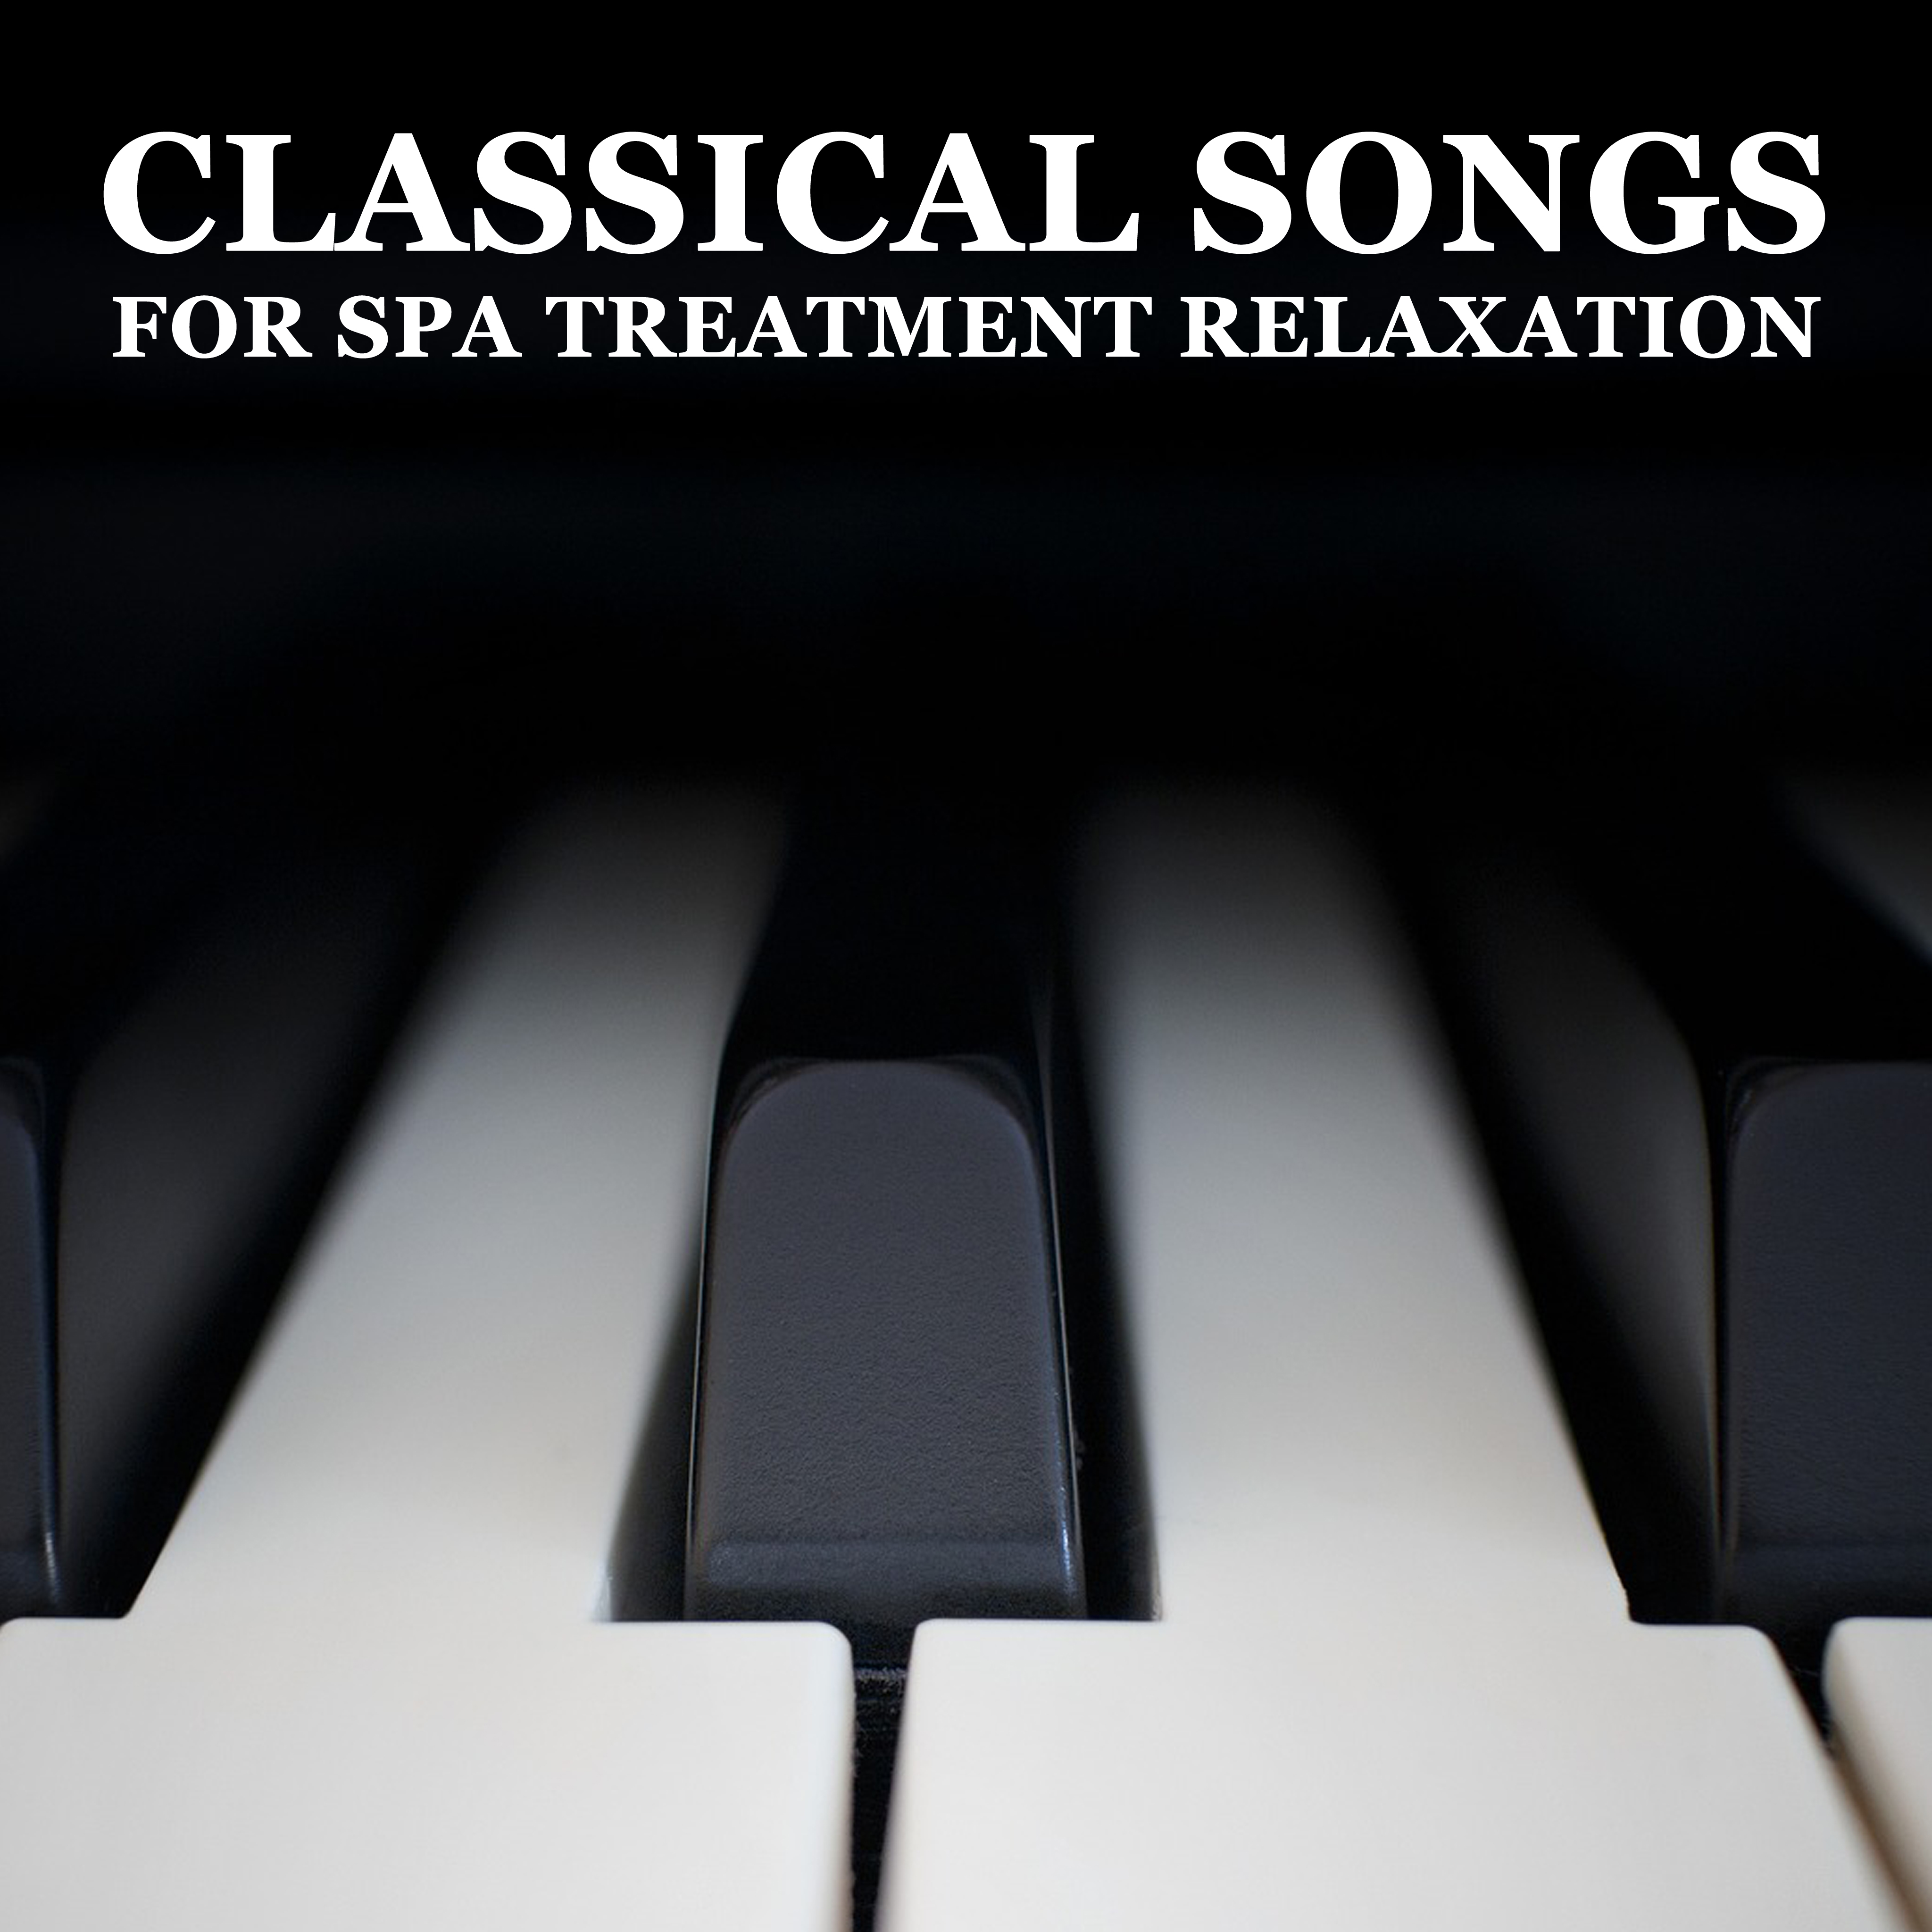 10 Classical Songs for Spa Treatment Relaxation